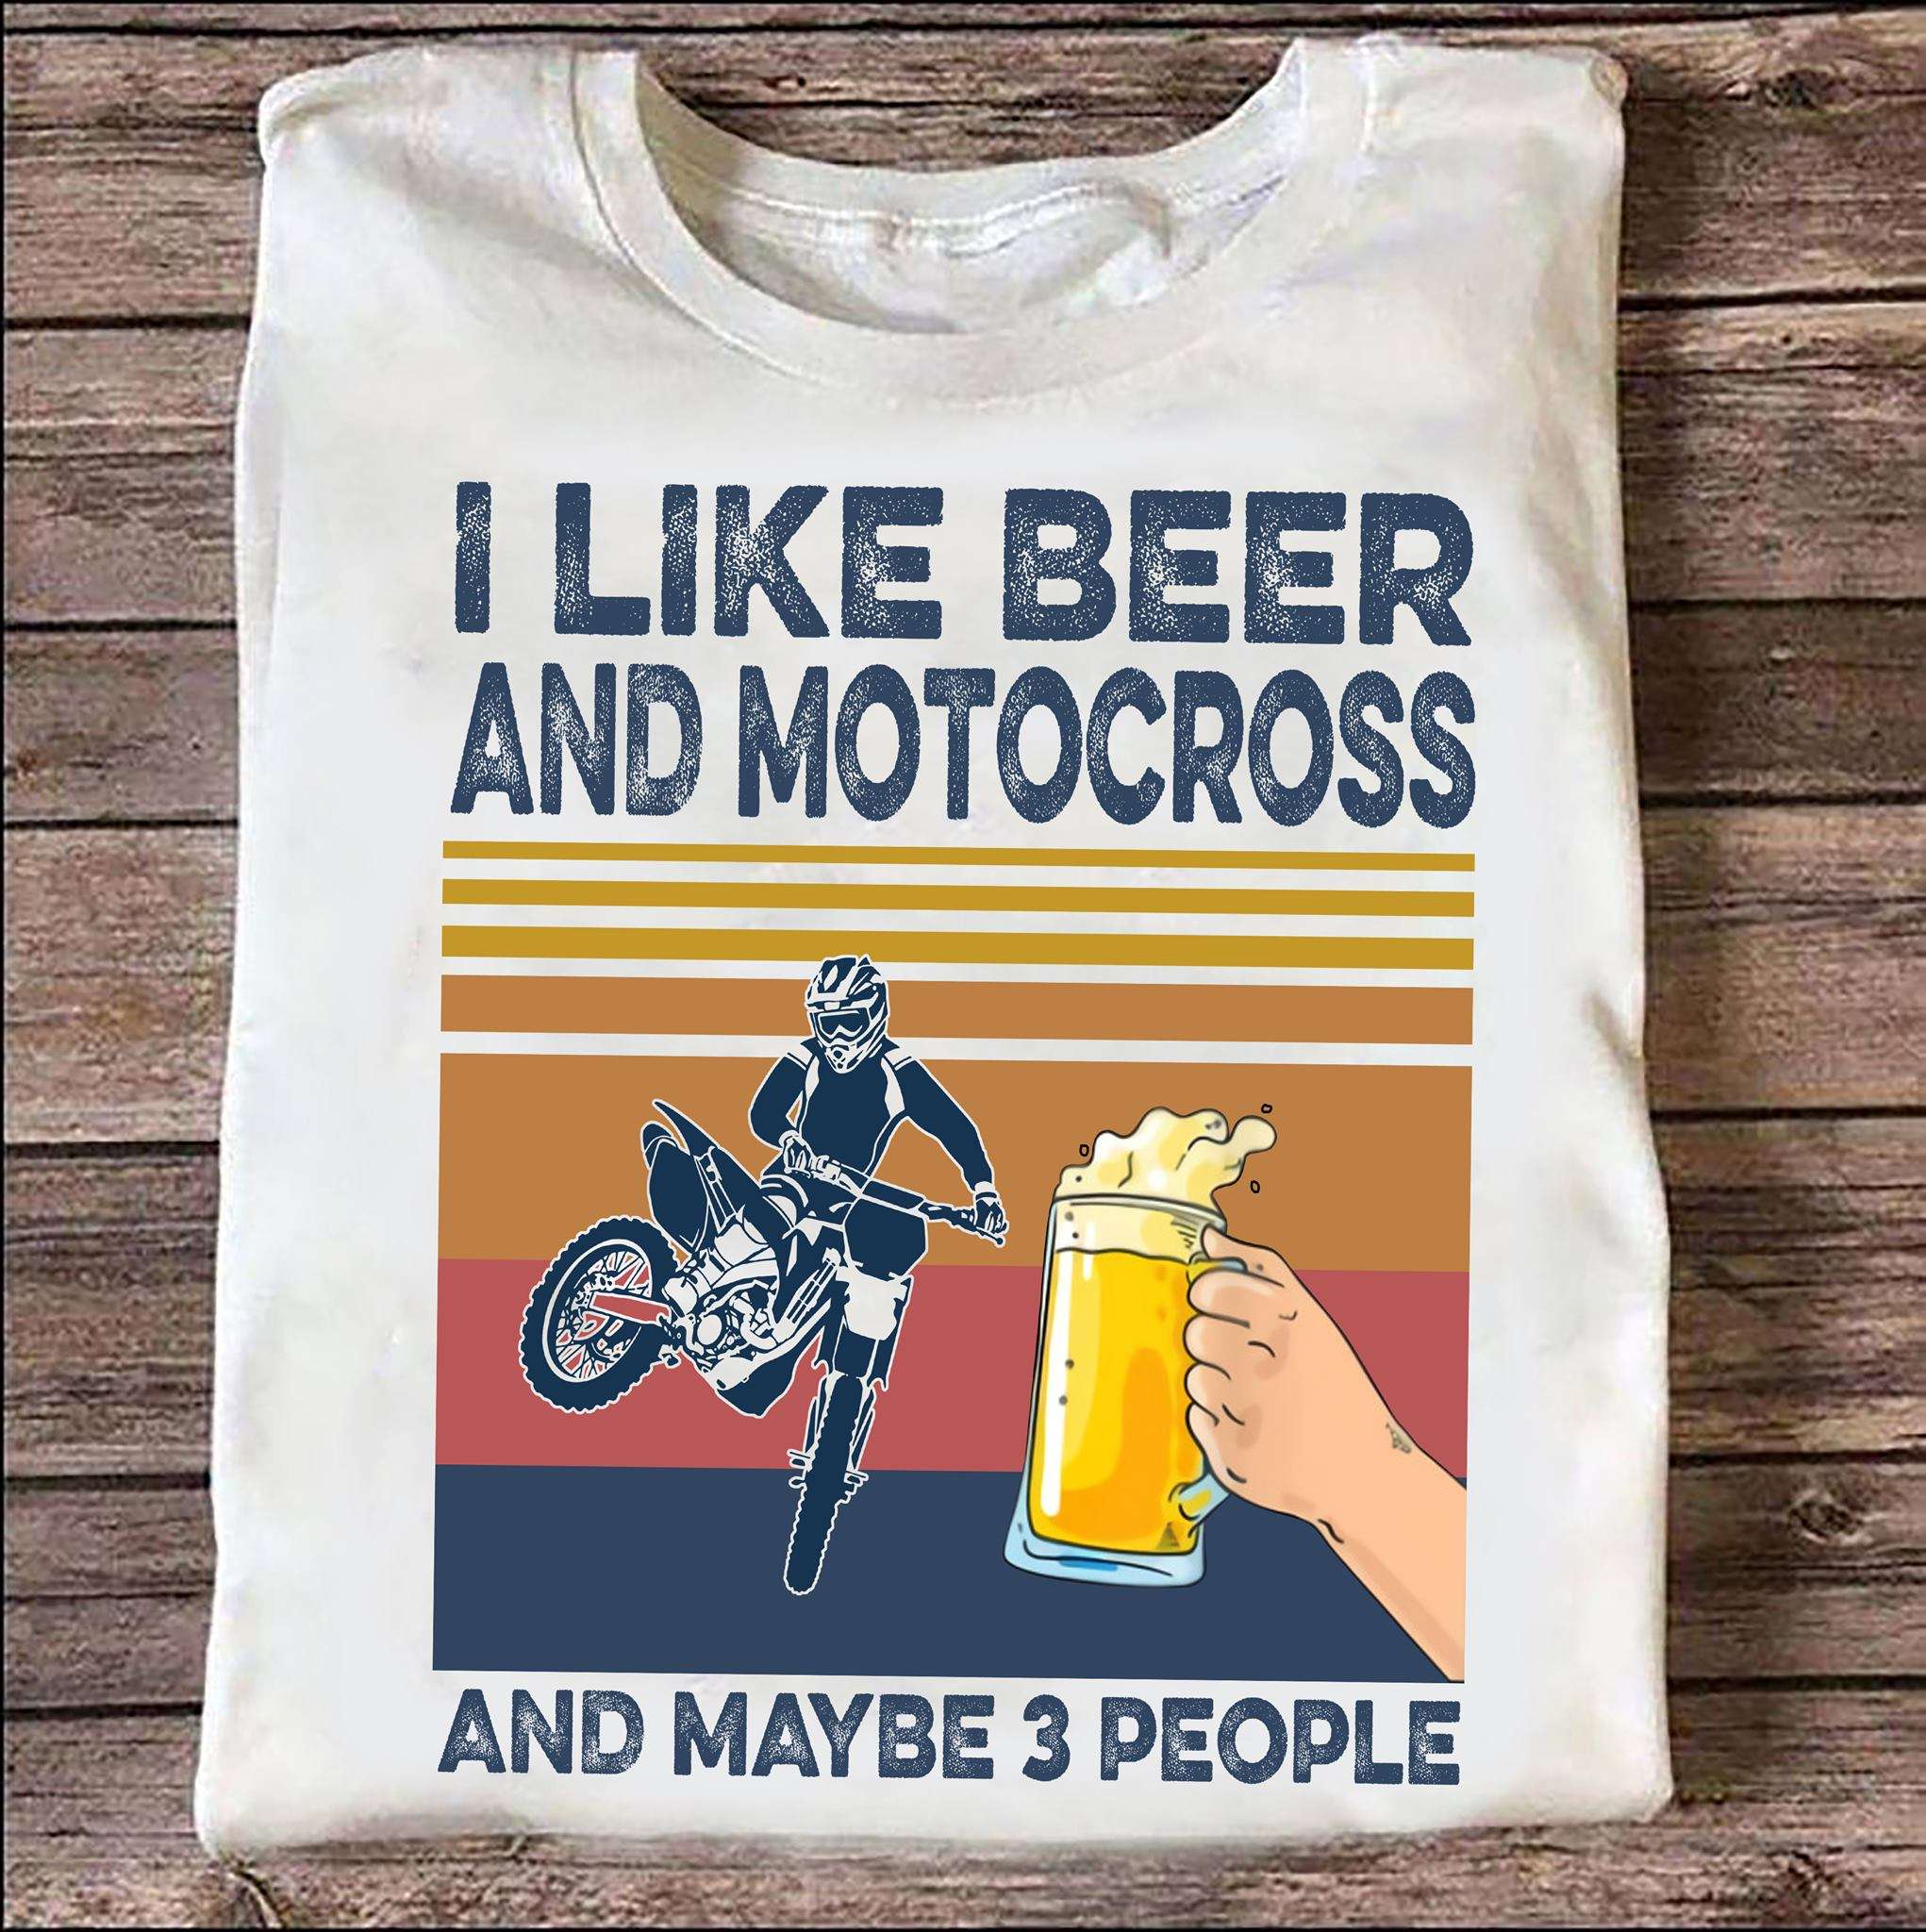 I like beer and motocross and maybe 3 people - Motocross racer, beer drinker